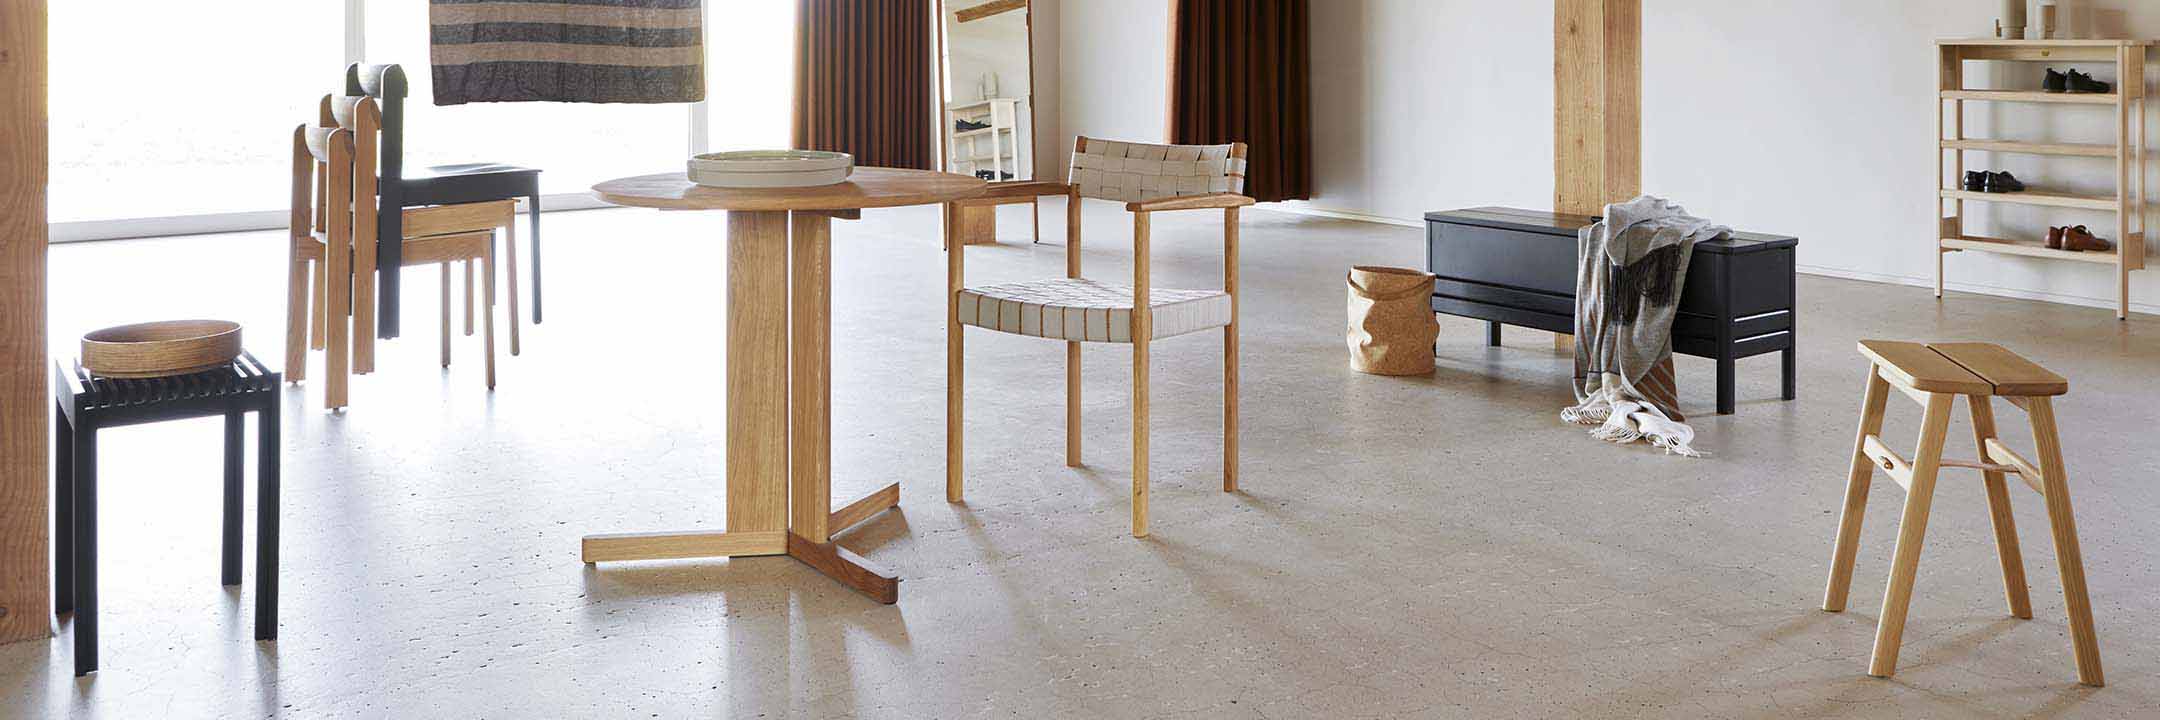 Danish design wooden chairs in different styles 